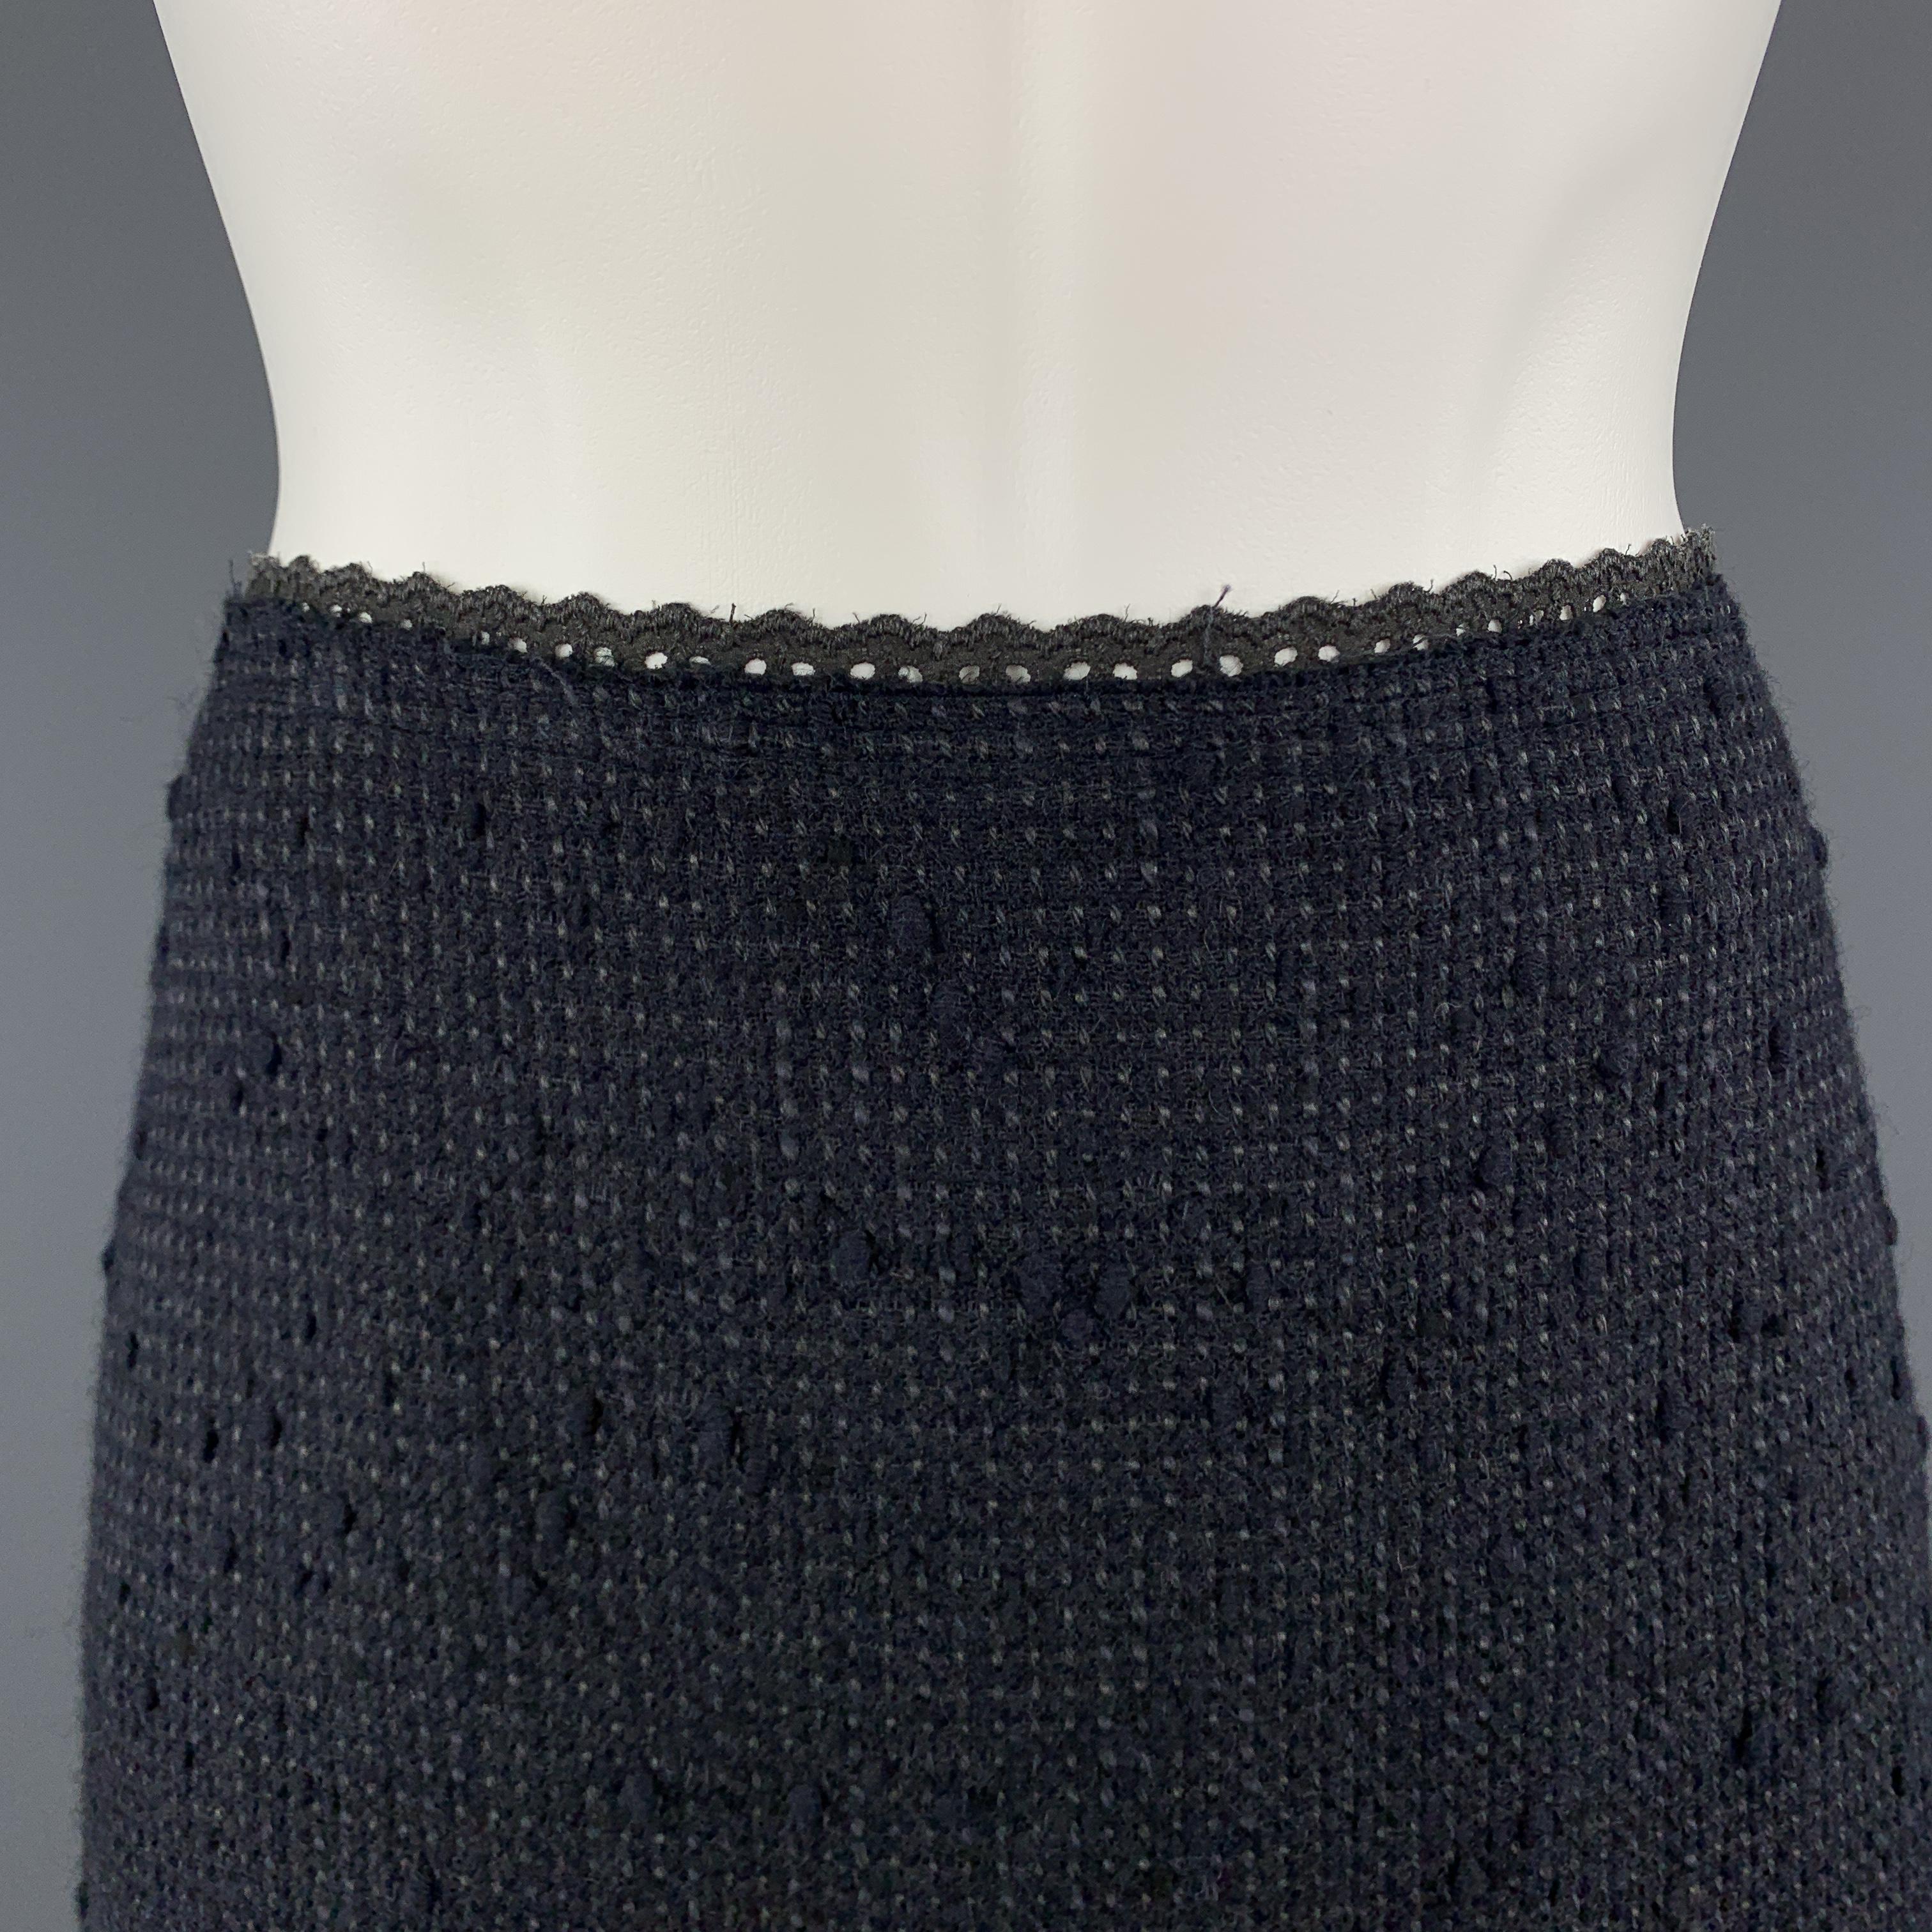 PRADA A line skirt comes in a navy textured tweed with charcoal lace trim. Made in Italy.

Excellent Pre-Owned Condition.
Marked: IT 42

Measurements:

Waist: 31 in.
Hip: 38 in.
Length: 23 in. 